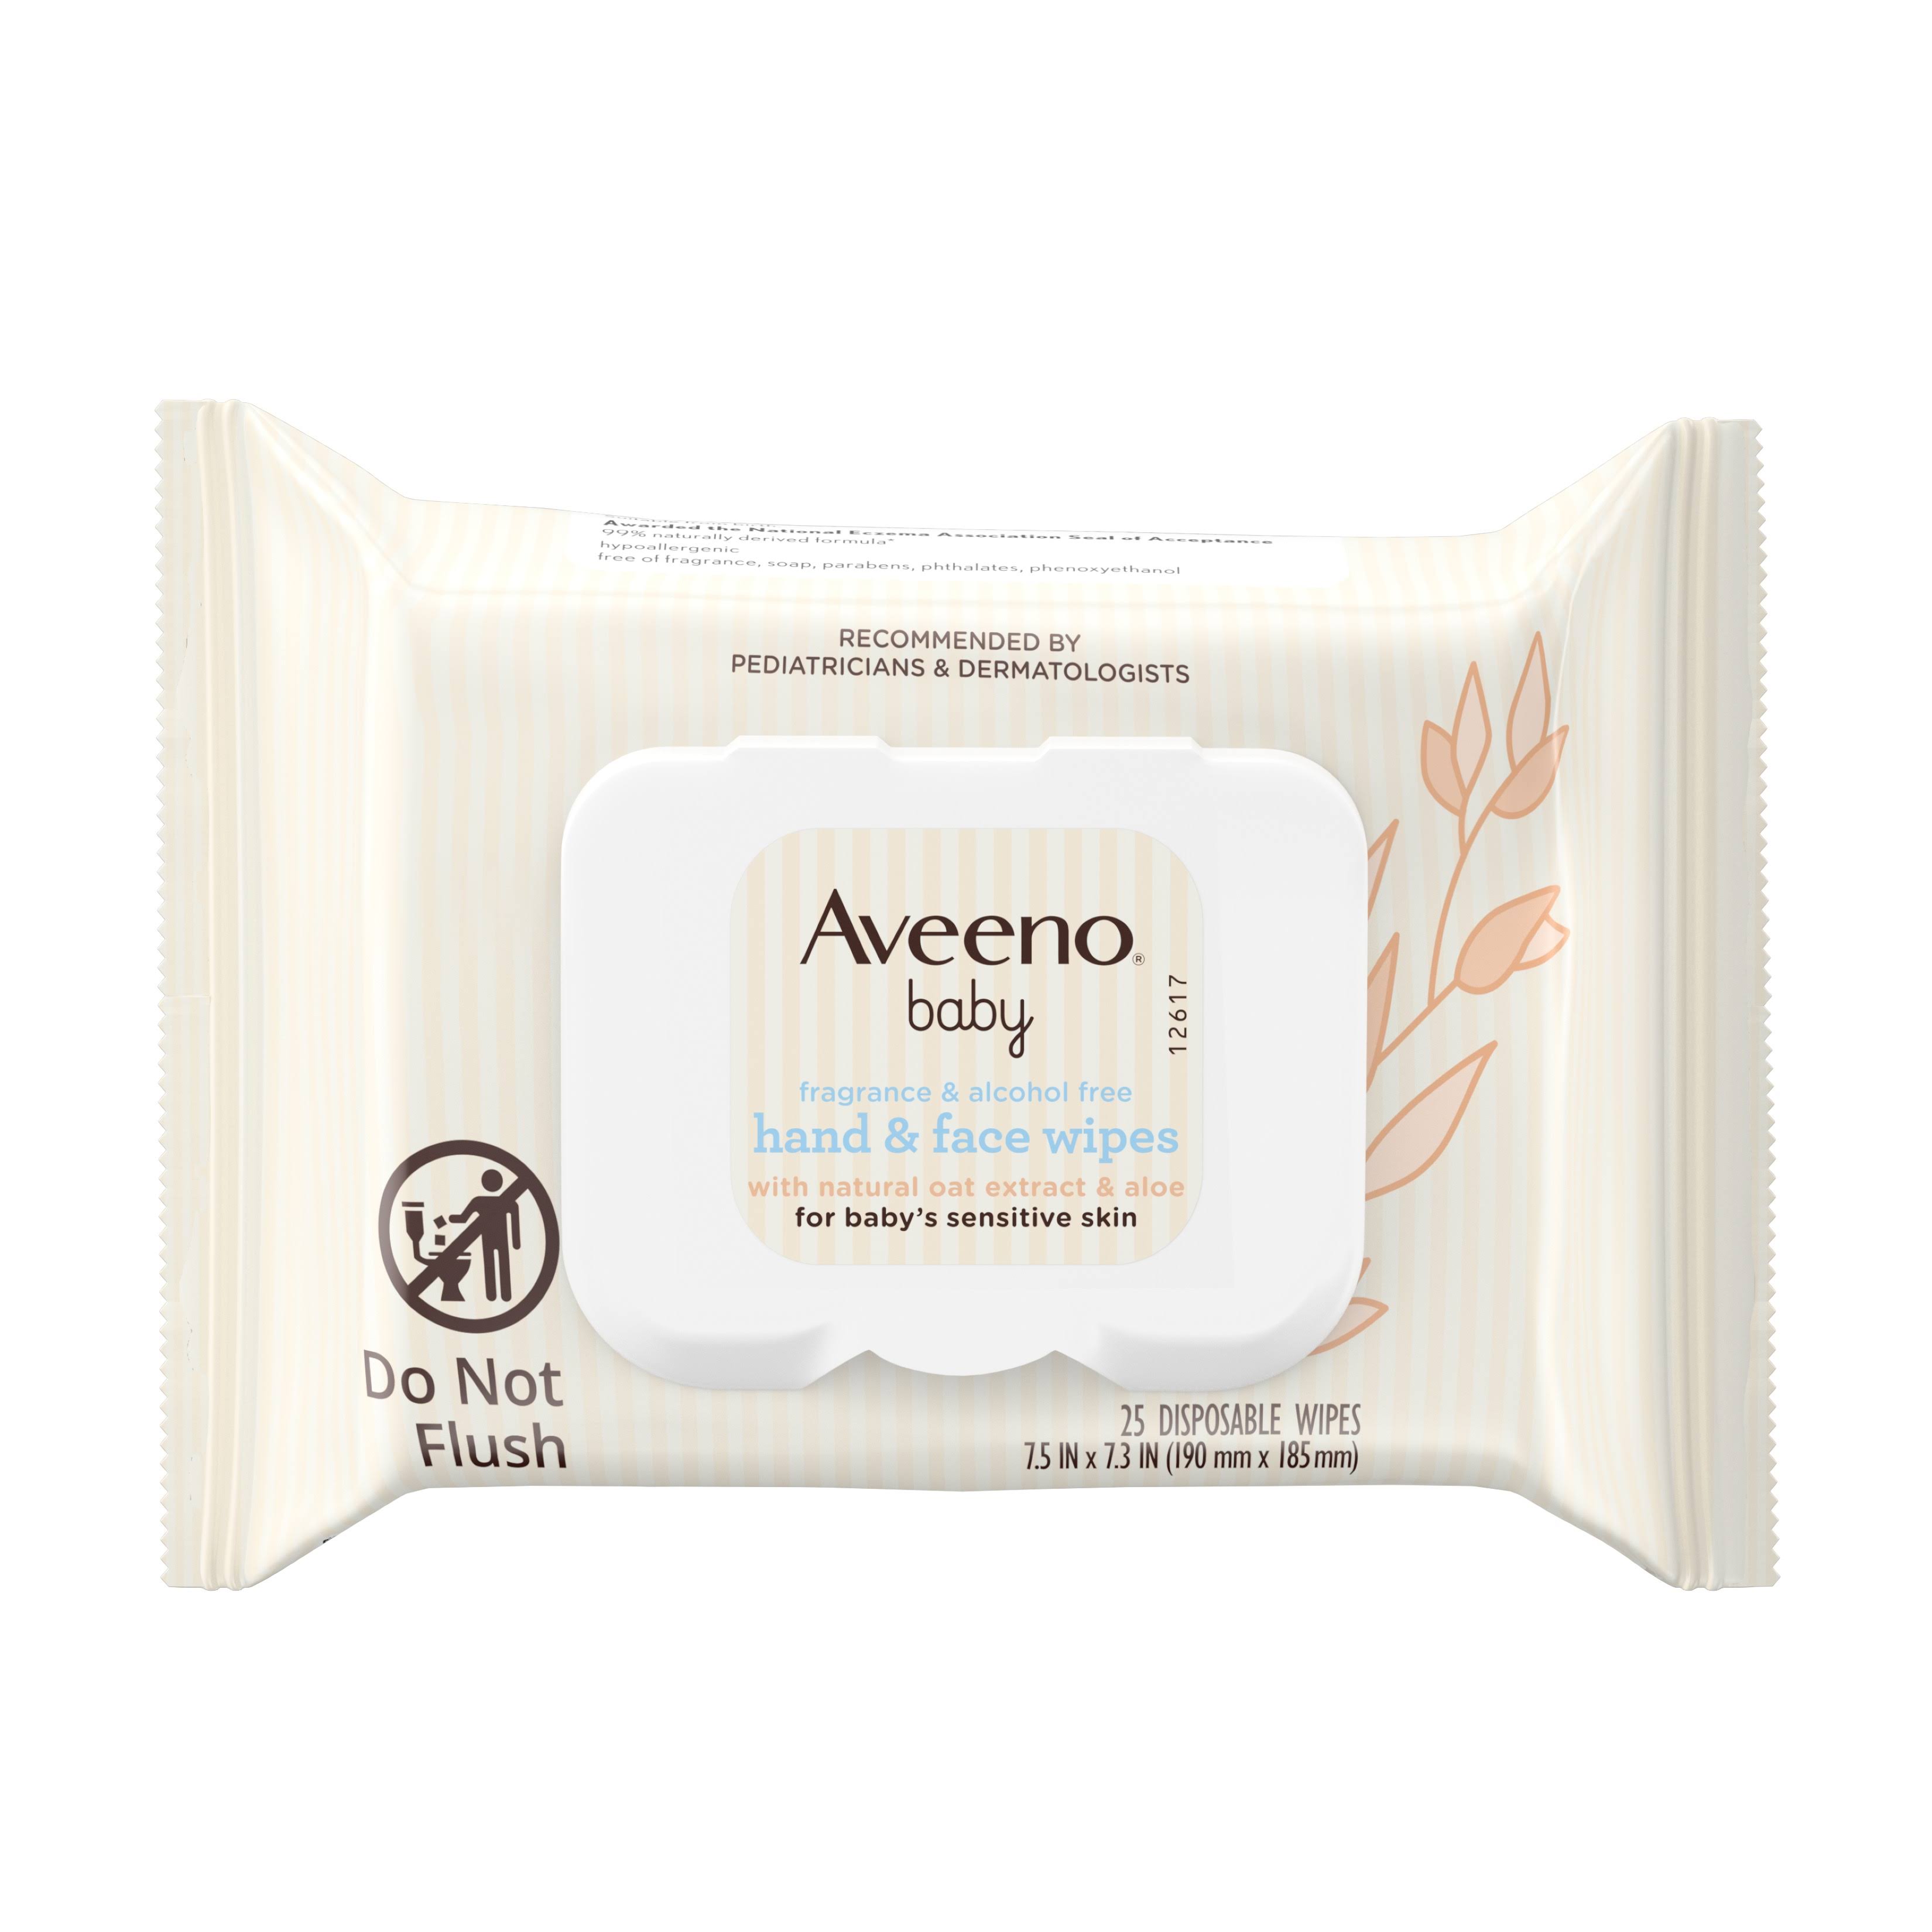 Aveeno Baby Hand & Face Wipes 25 Disposable Wipes